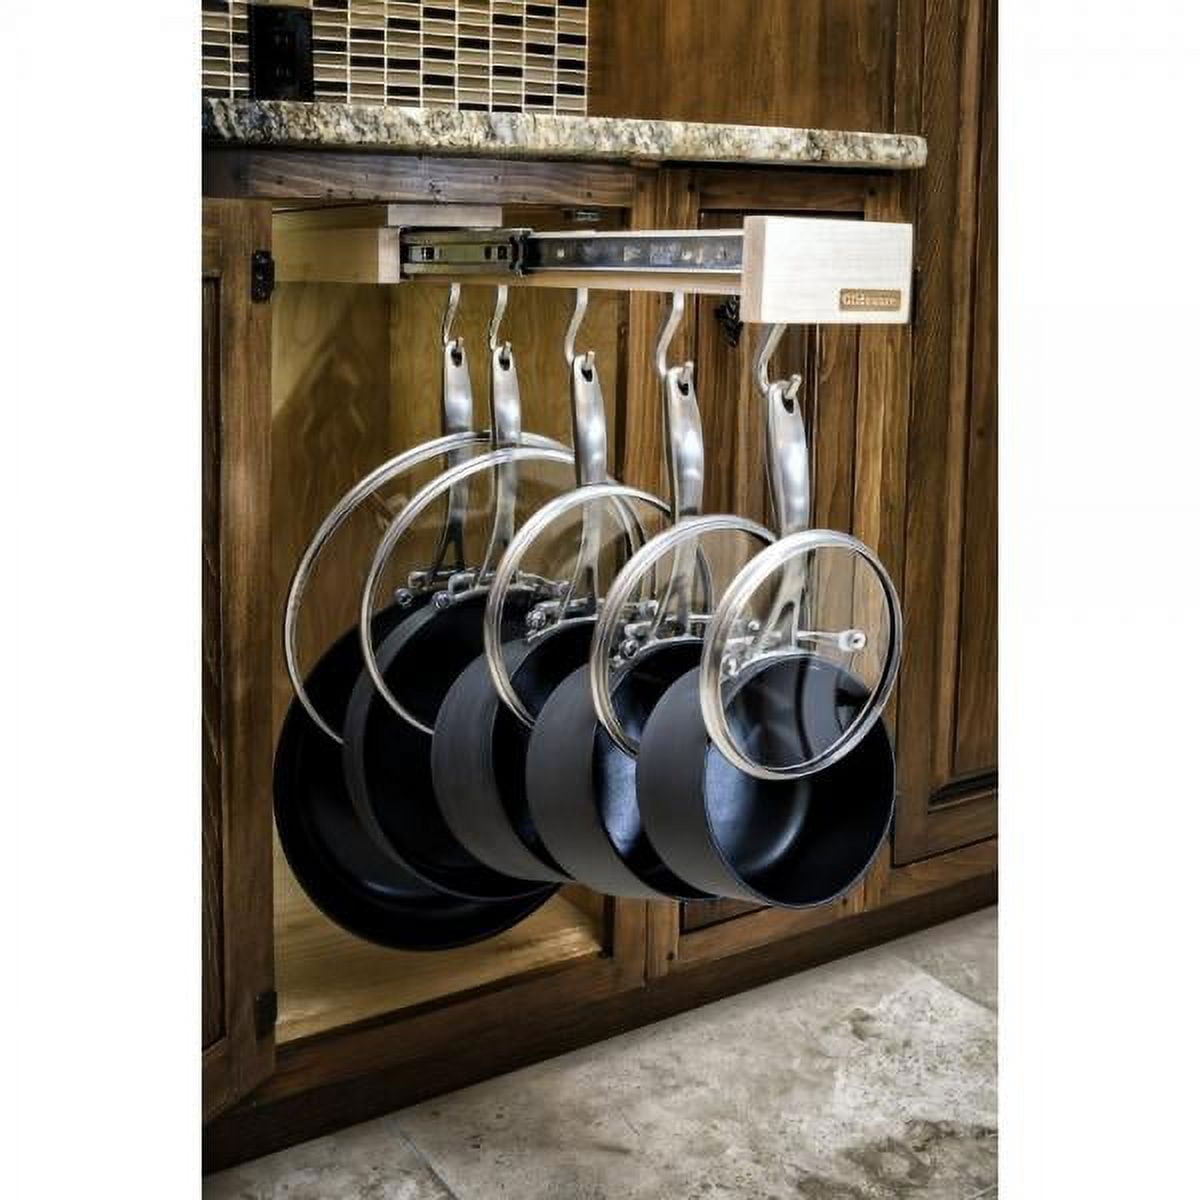 Glideware Wood Pull-out Cabinet Organizer for Pots, Pans, and Much More -  Walmart.com